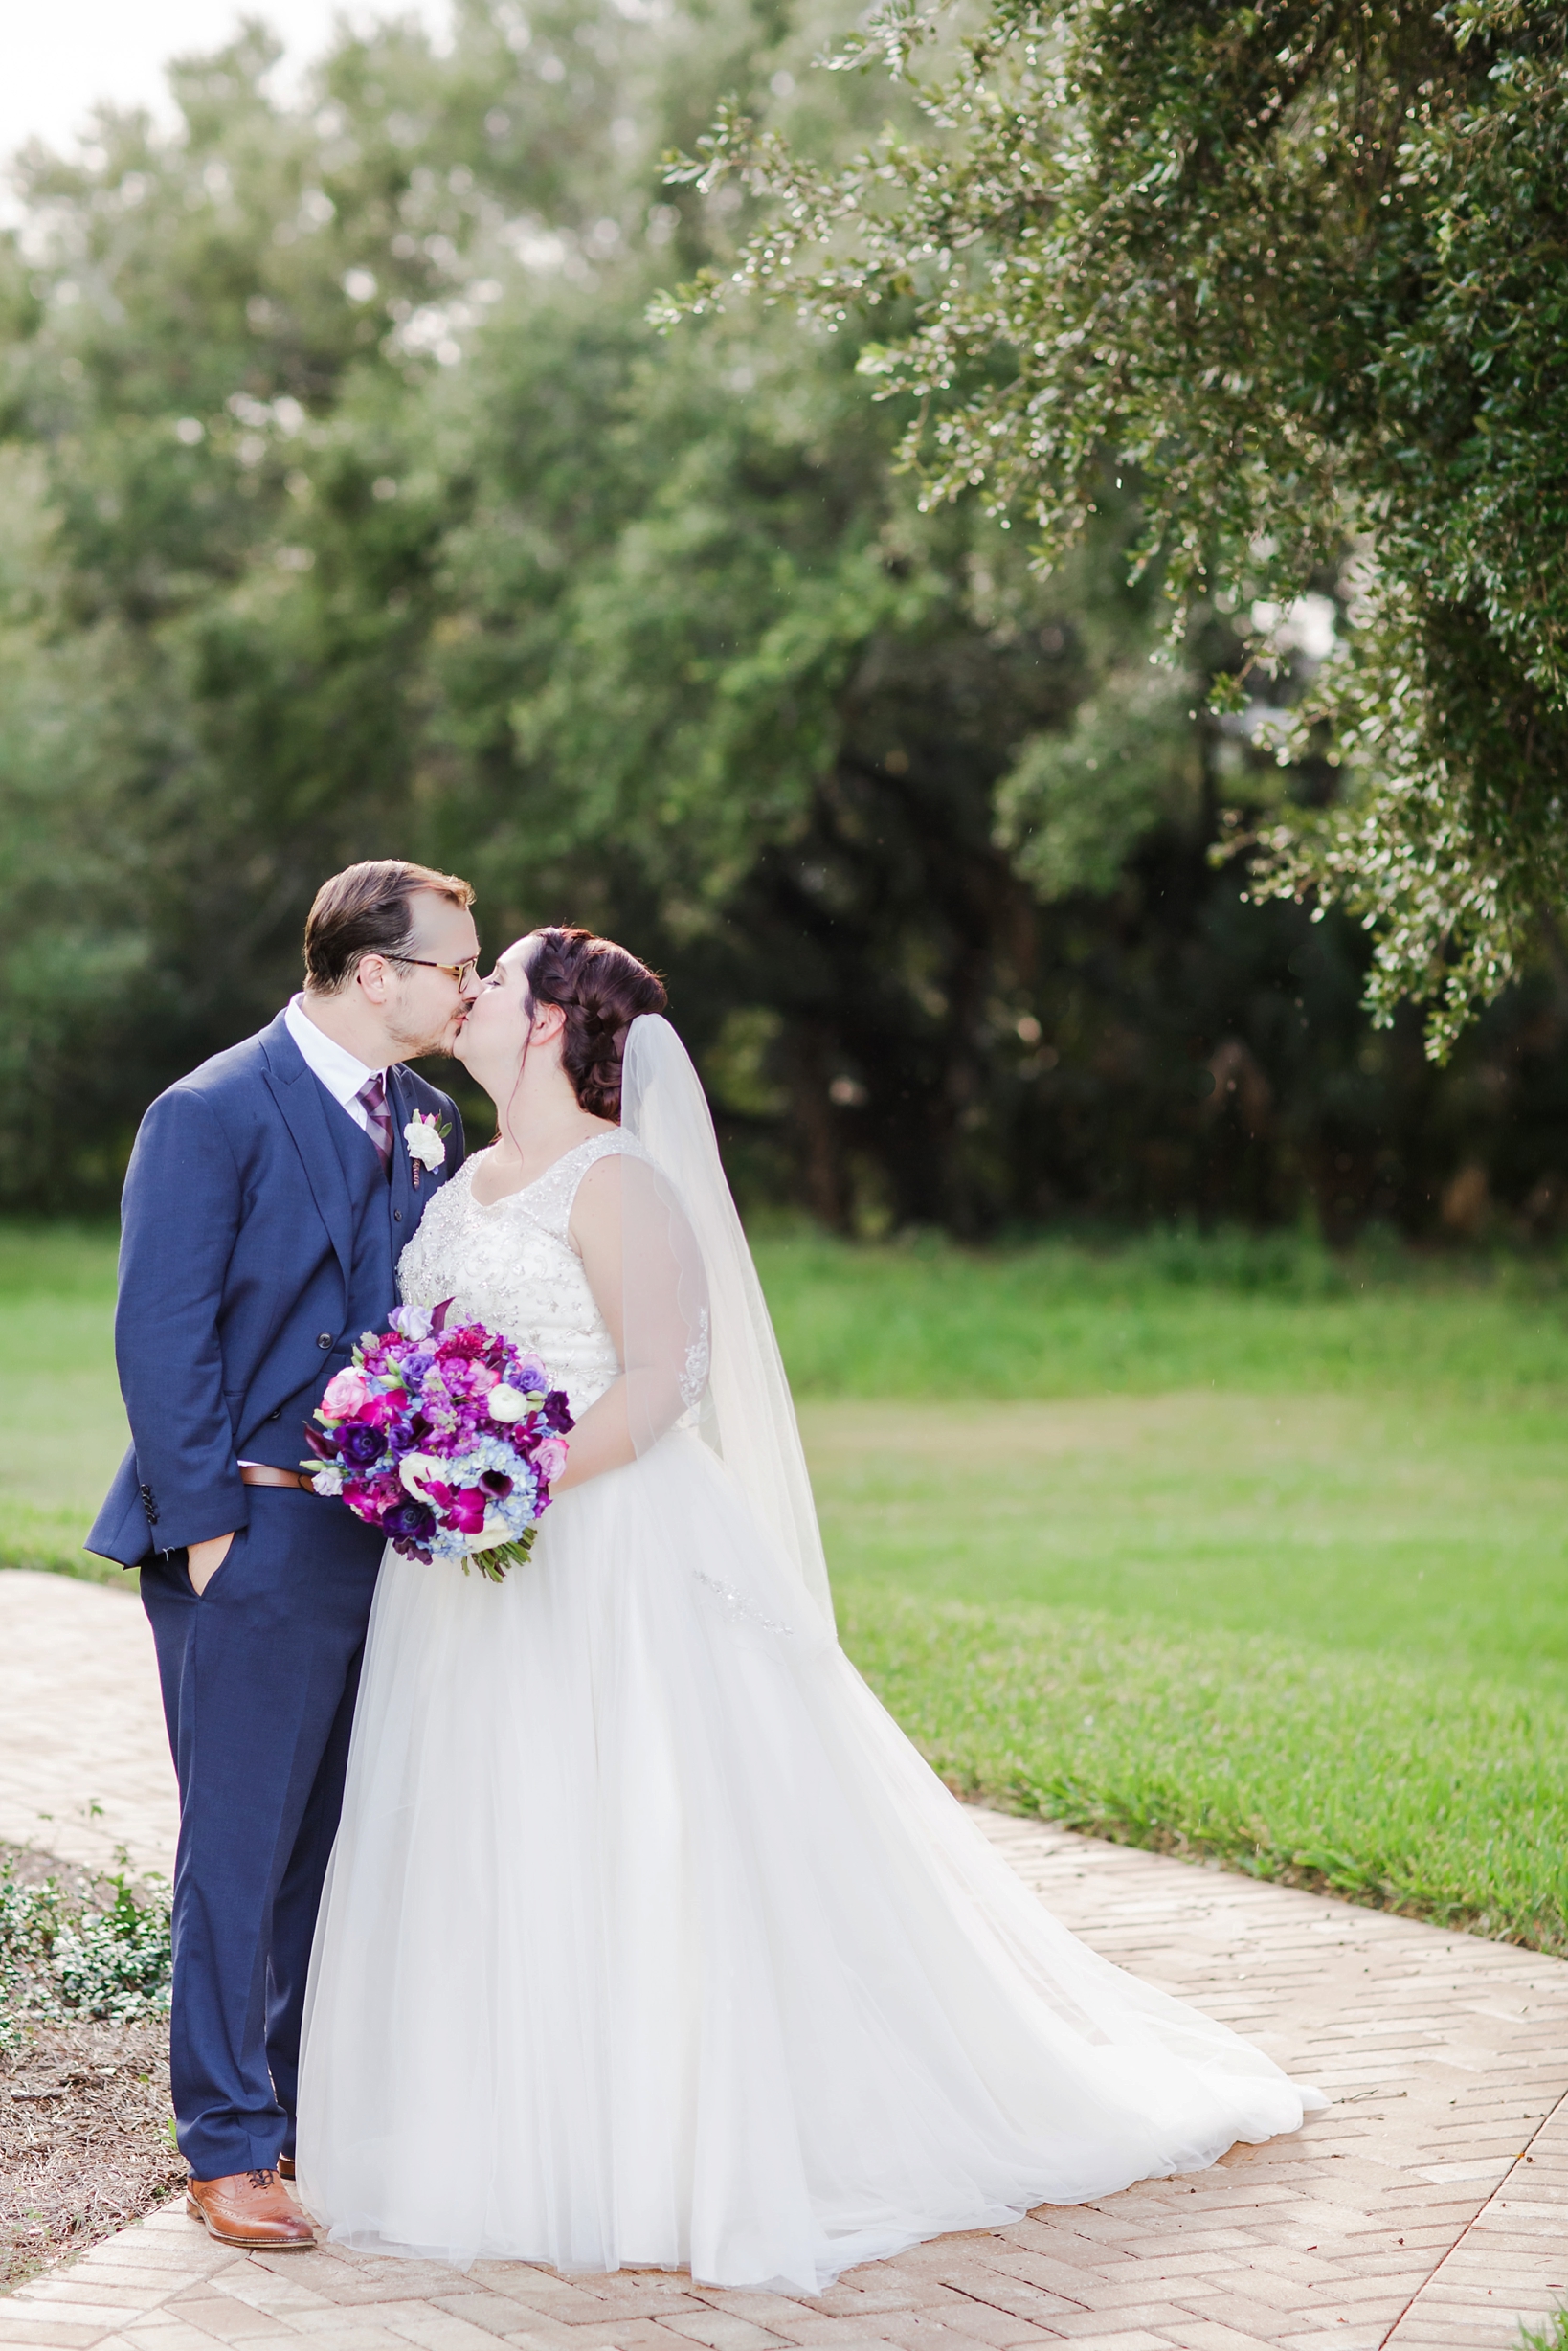 Bride and groom share a kiss on the grounds of the harborside chapel by Sarah & Ben Photography